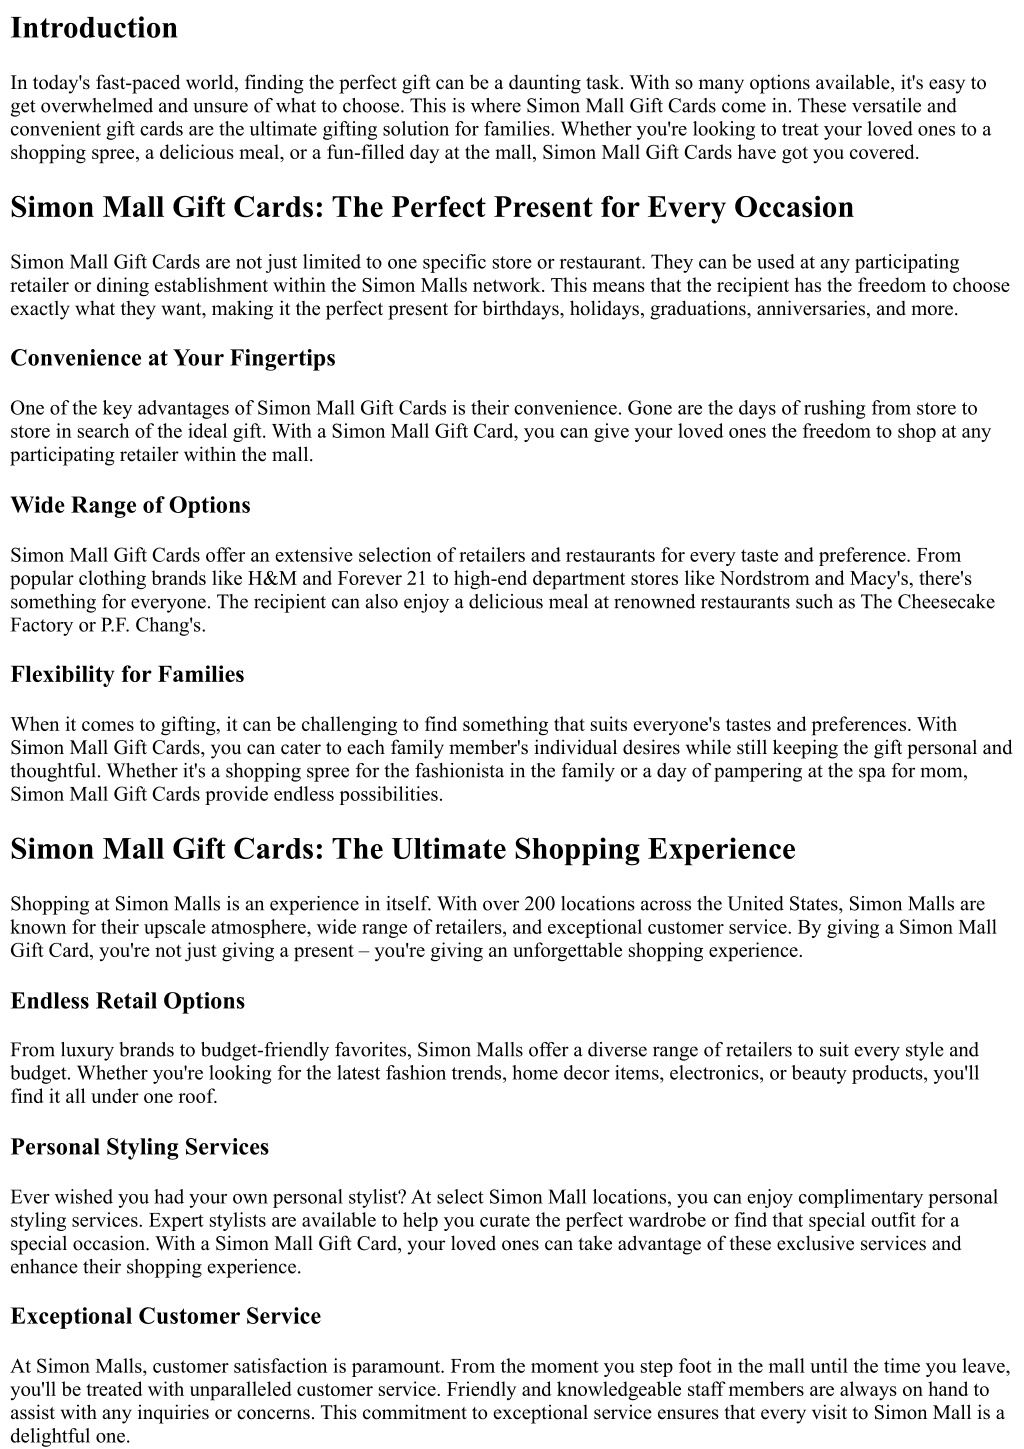 Simon Giftcards® - Give The Gift Of Shopping